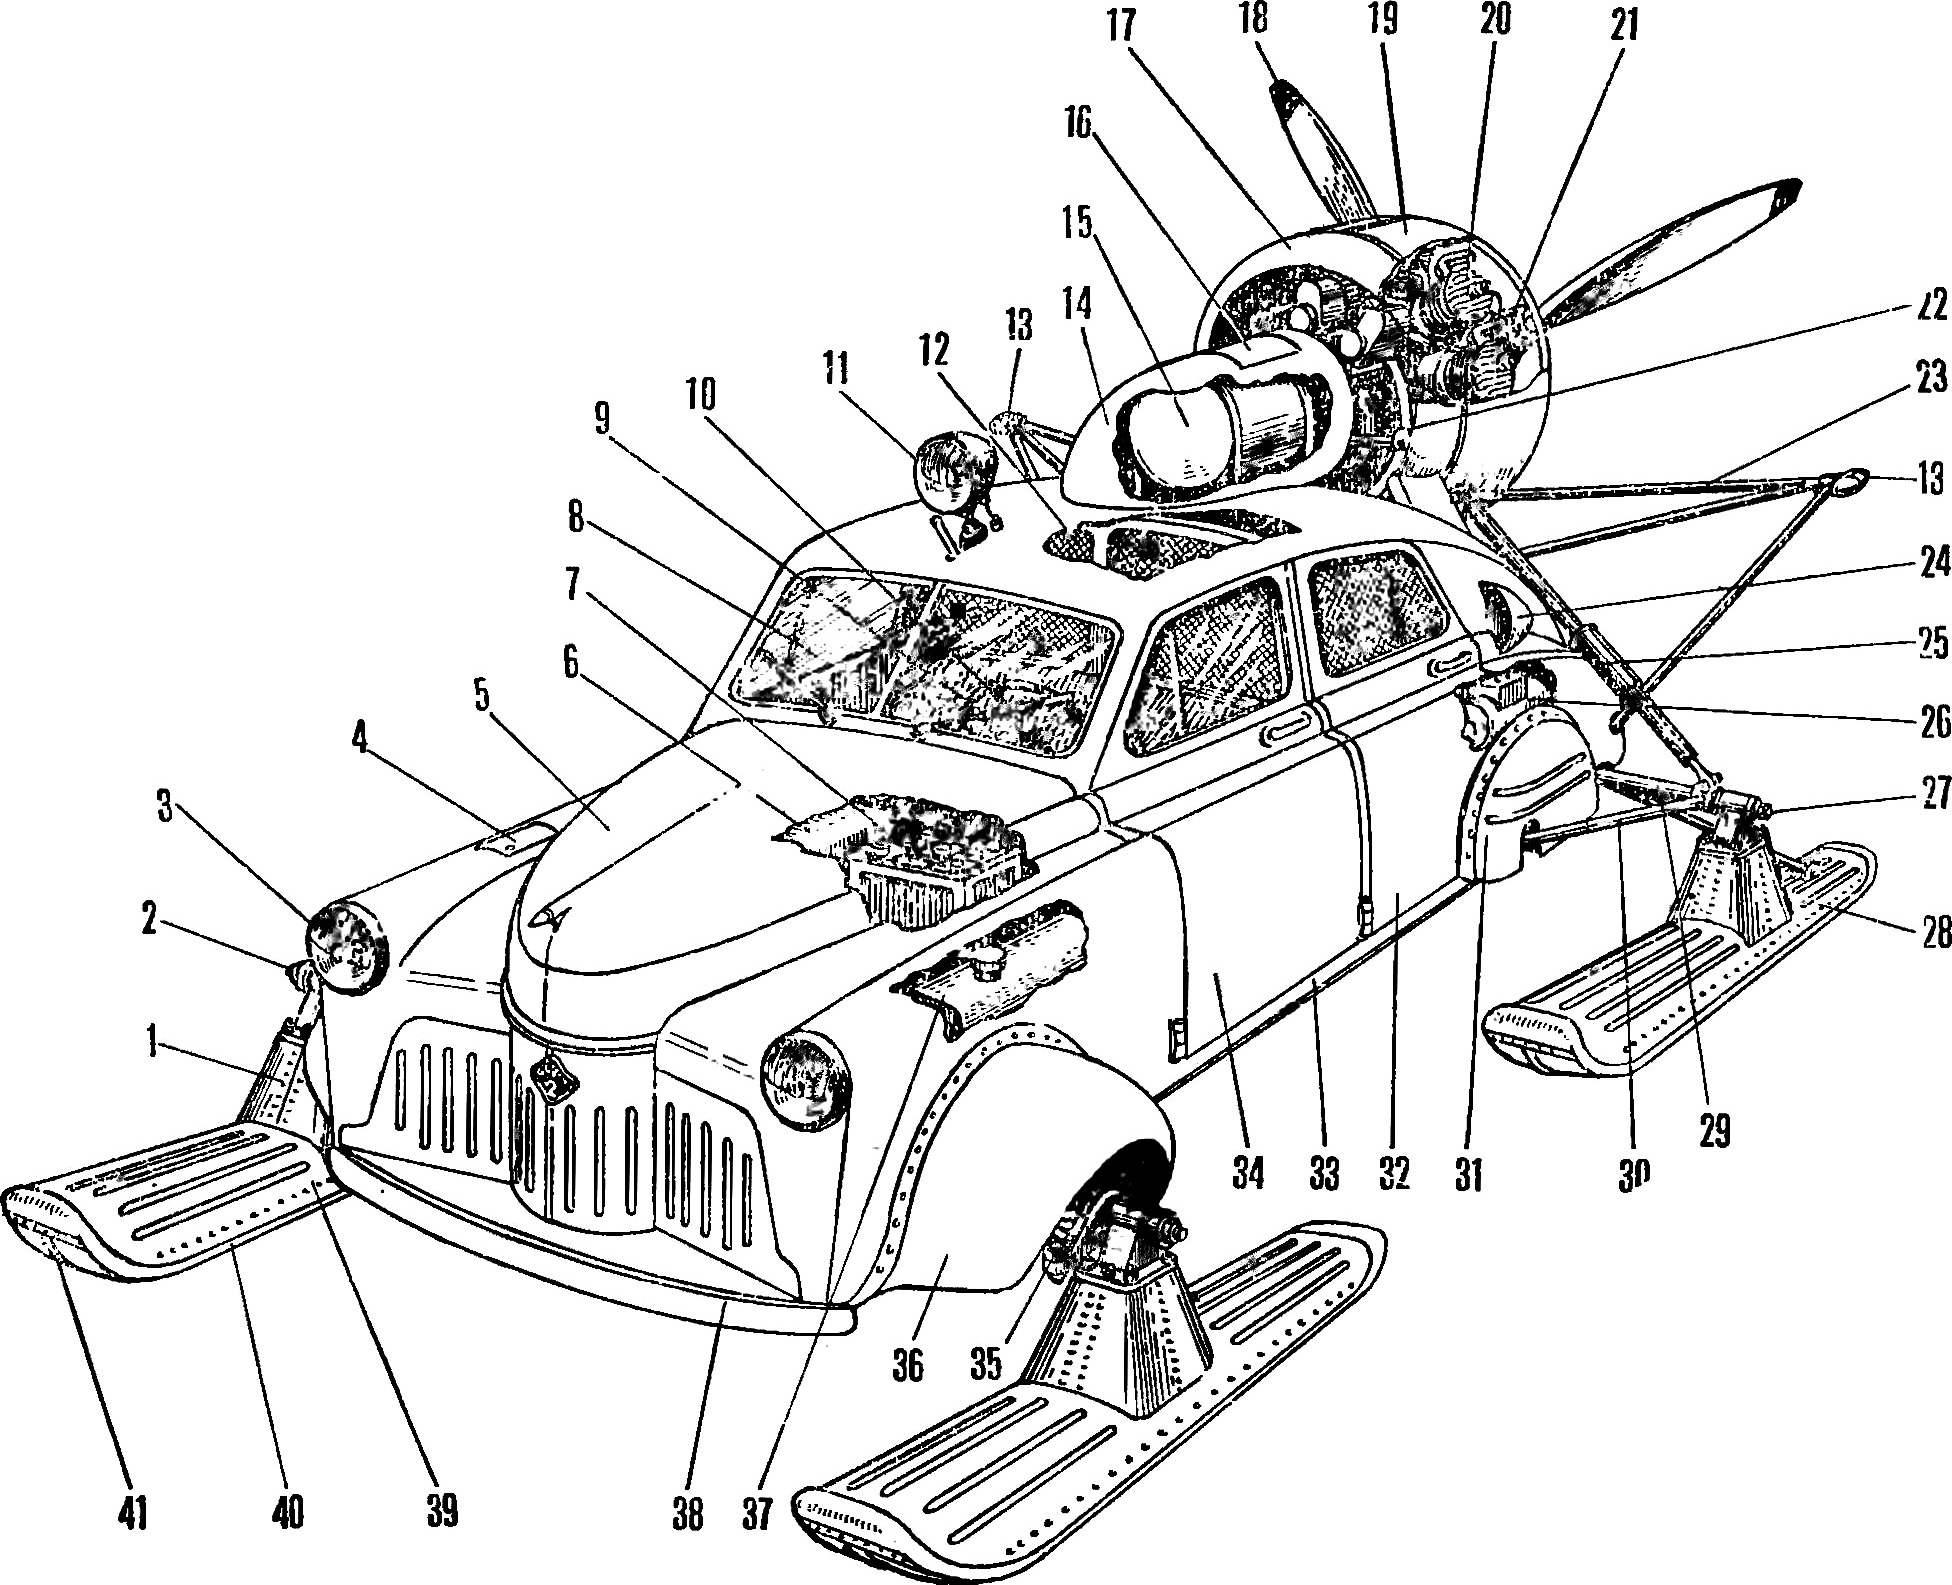 Fig. 2. The layout of the snowmobile 